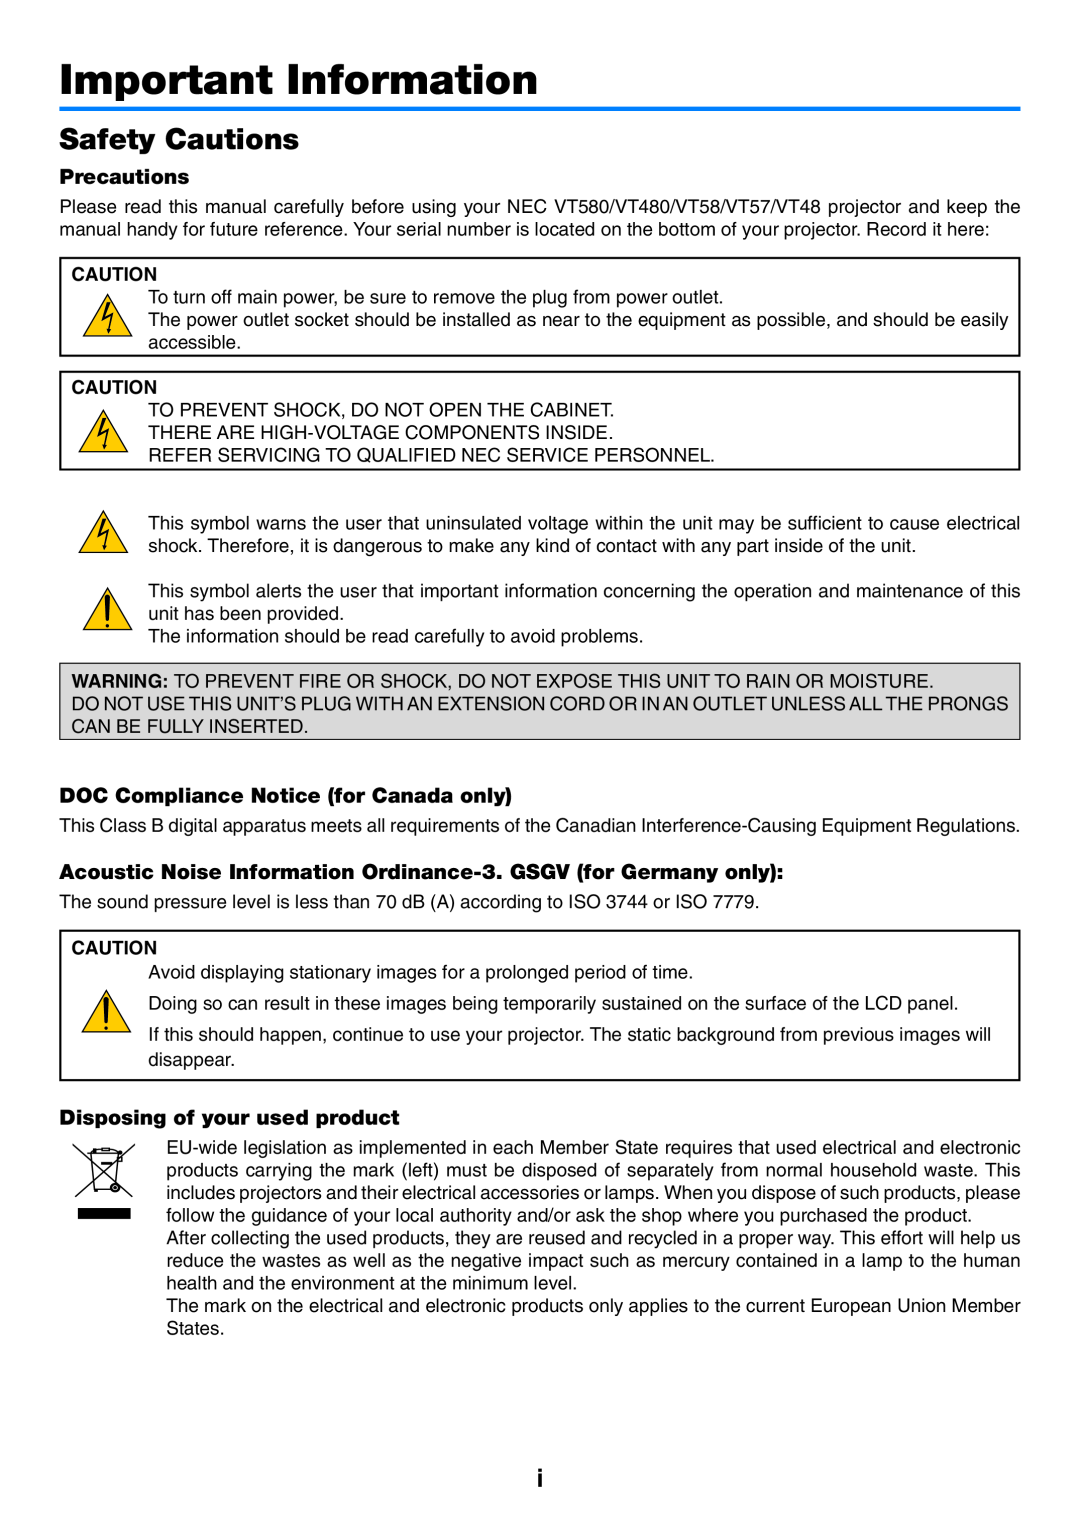 NEC VT57, VT58, VT480 manual Important Information, Safety Cautions, Precautions, DOC Compliance Notice for Canada only 